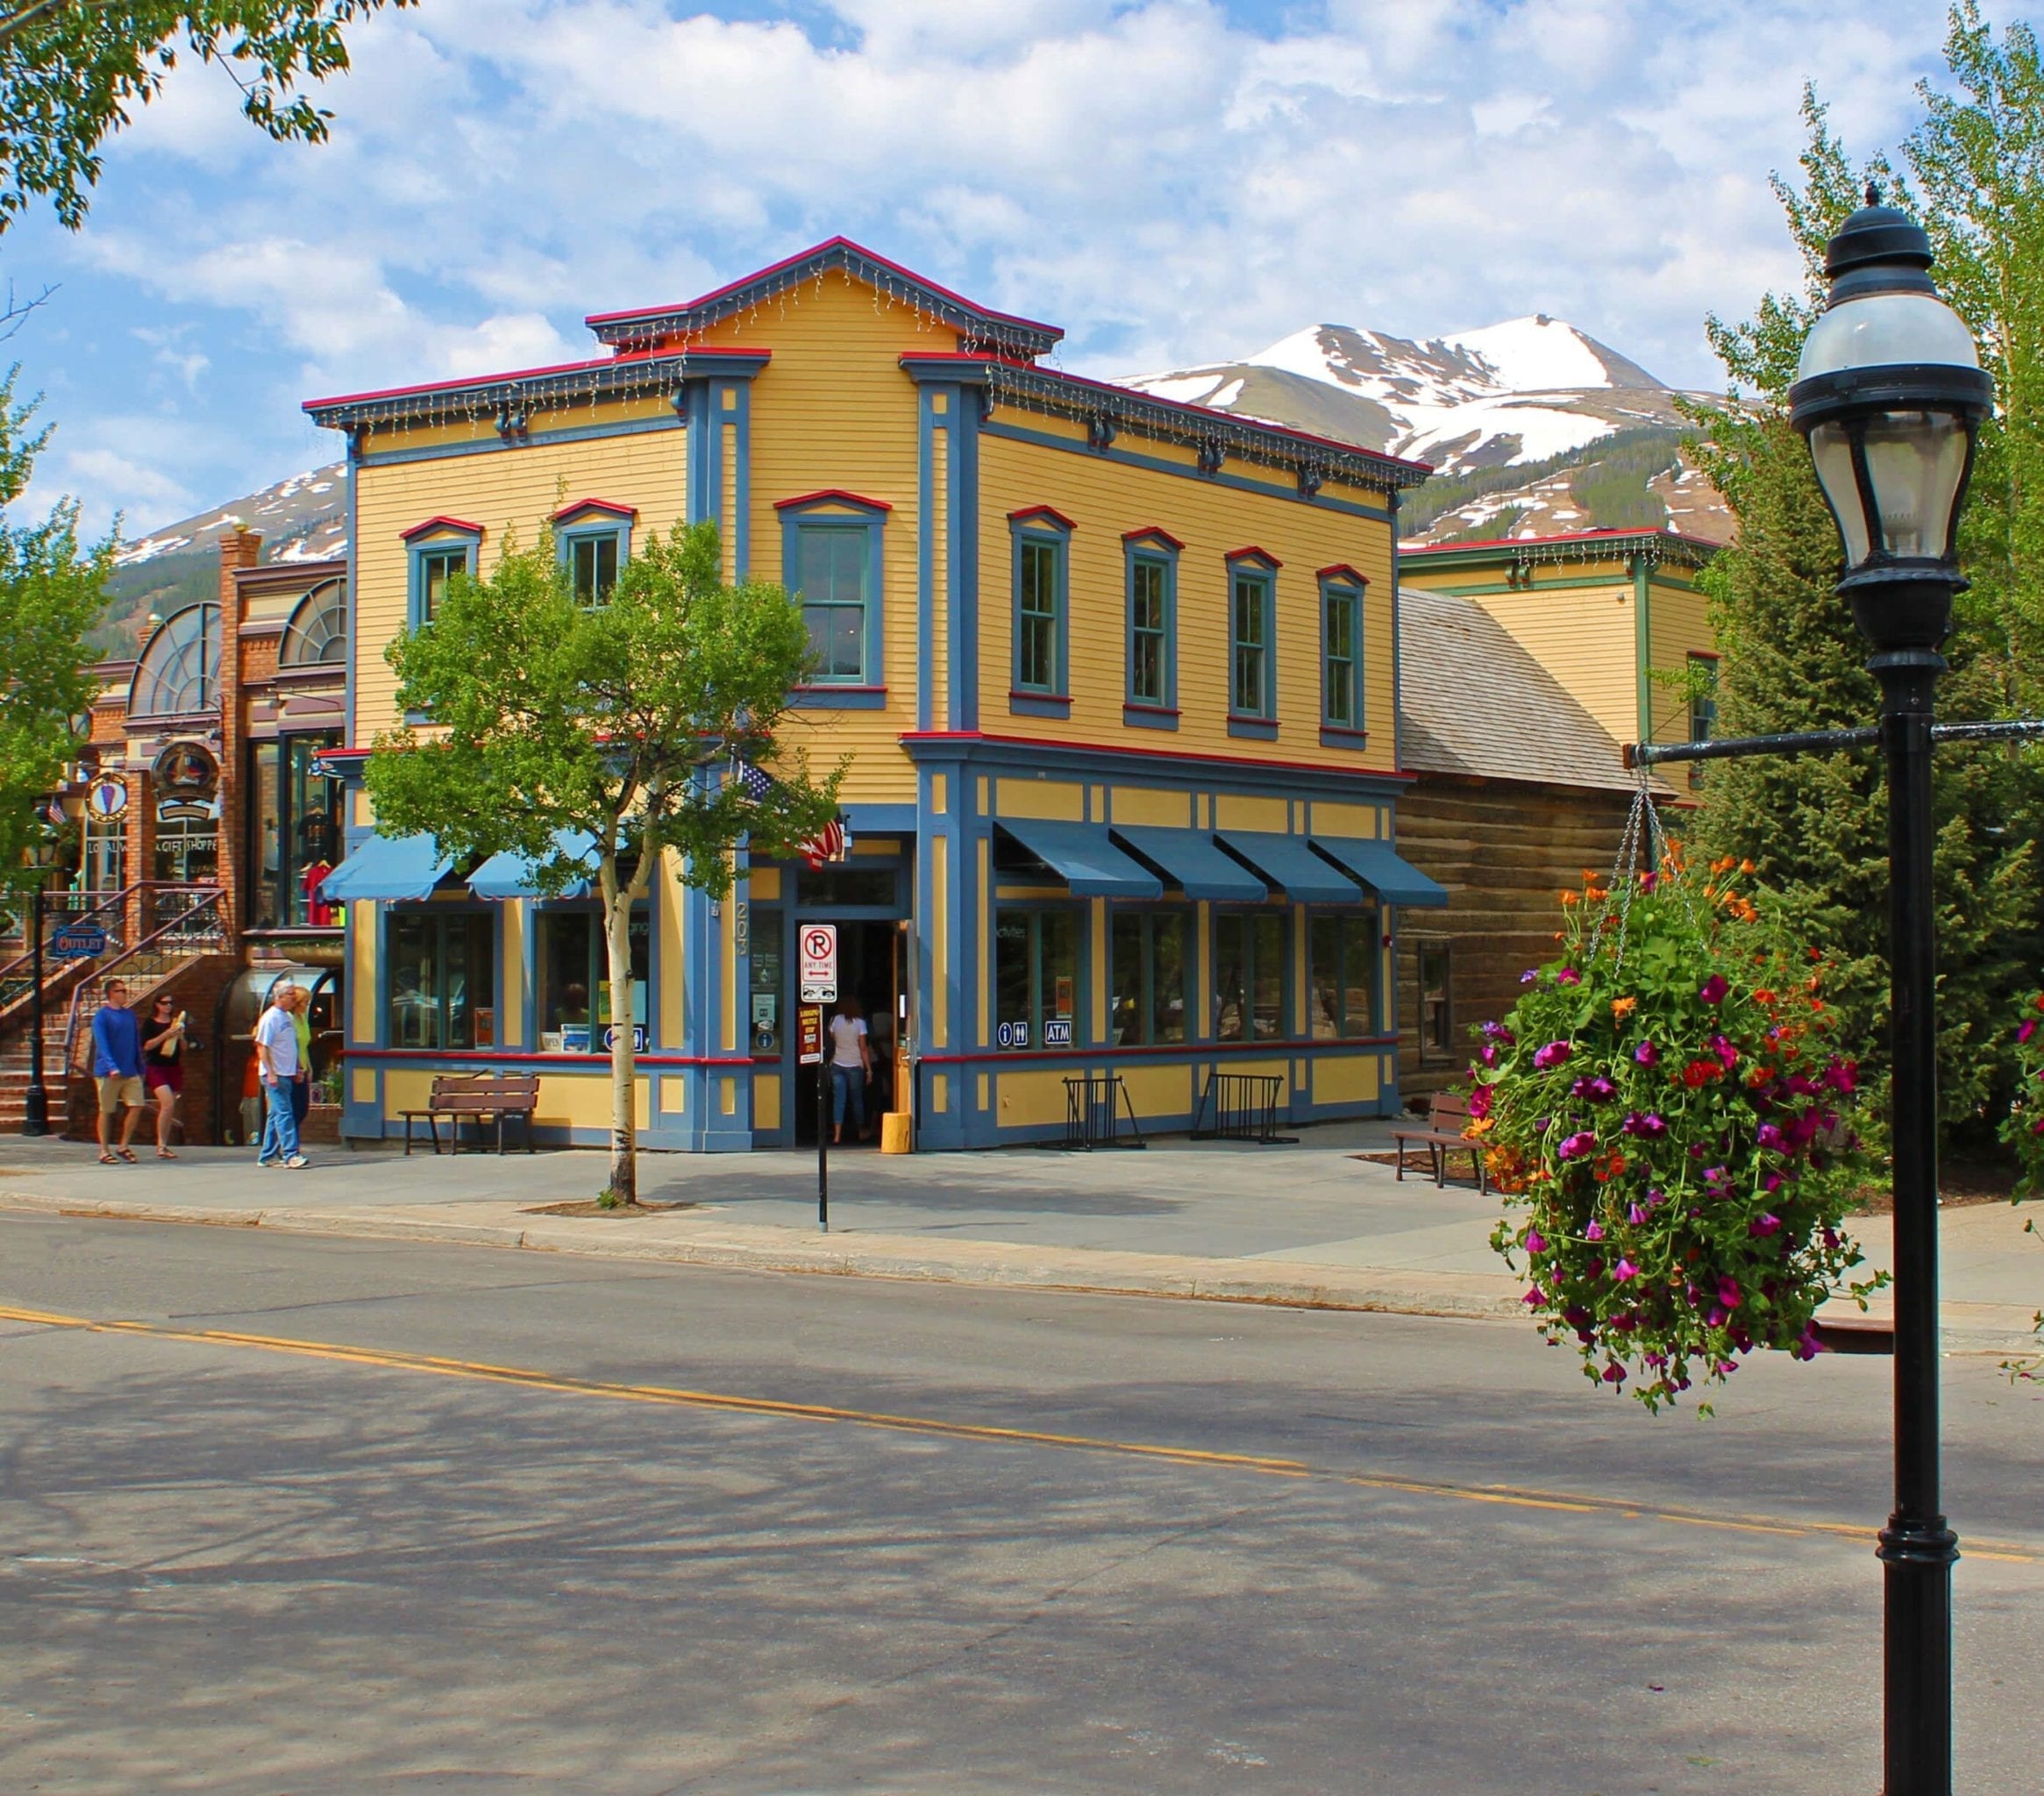 The Welcome Center on Main Street in Breckenridge during Summer